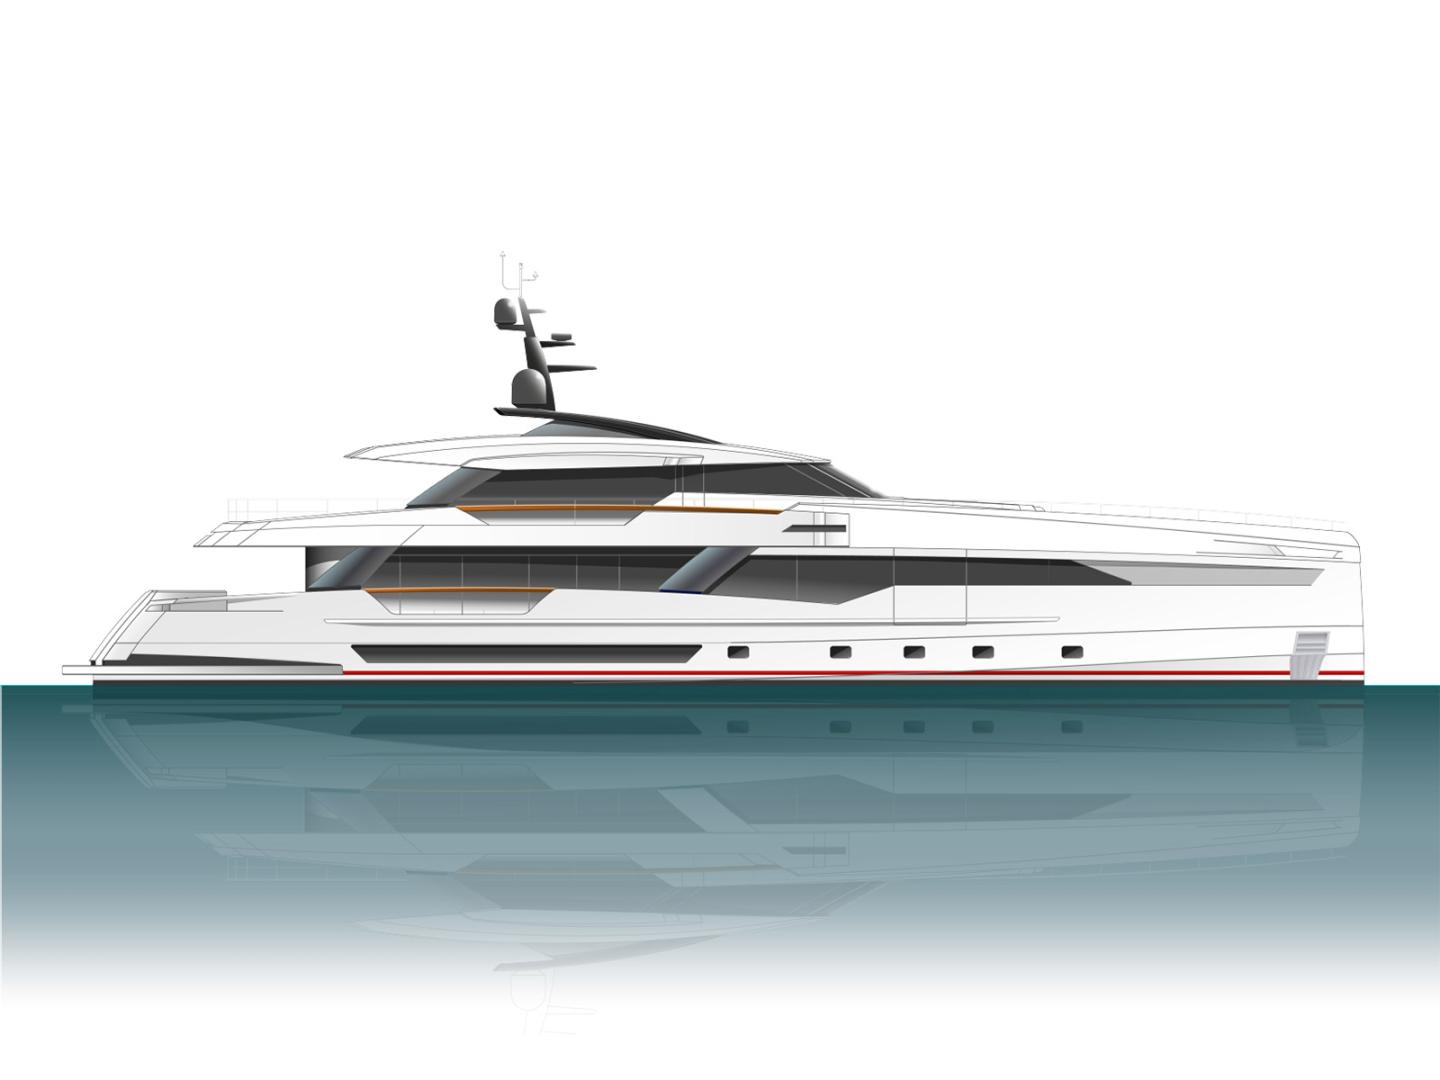 Wider Yachts announces the launch of plans for a new 130' yacht